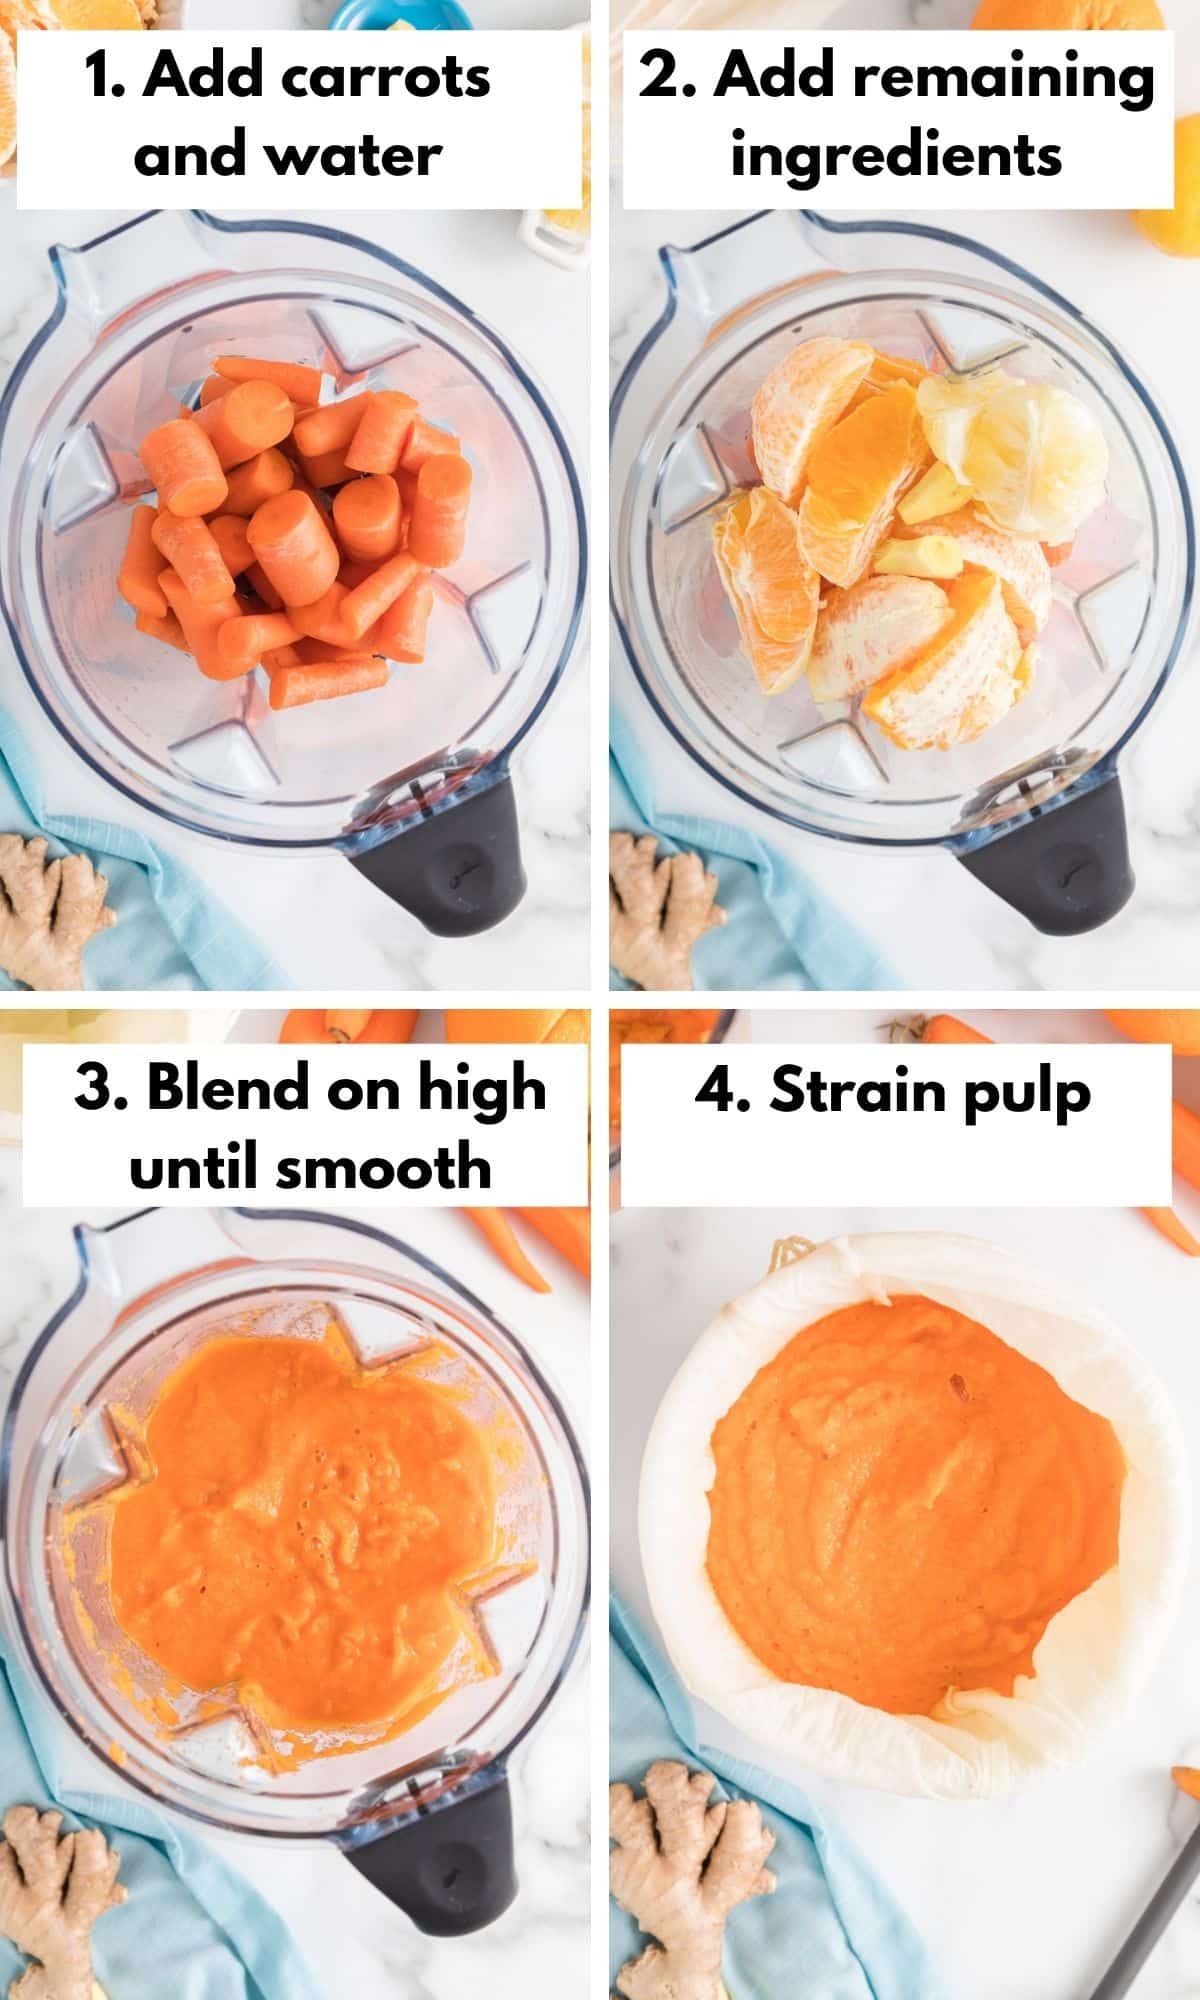 https://www.cleaneatingkitchen.com/wp-content/uploads/2022/05/Carrot-Juice-Process-Collage.jpg